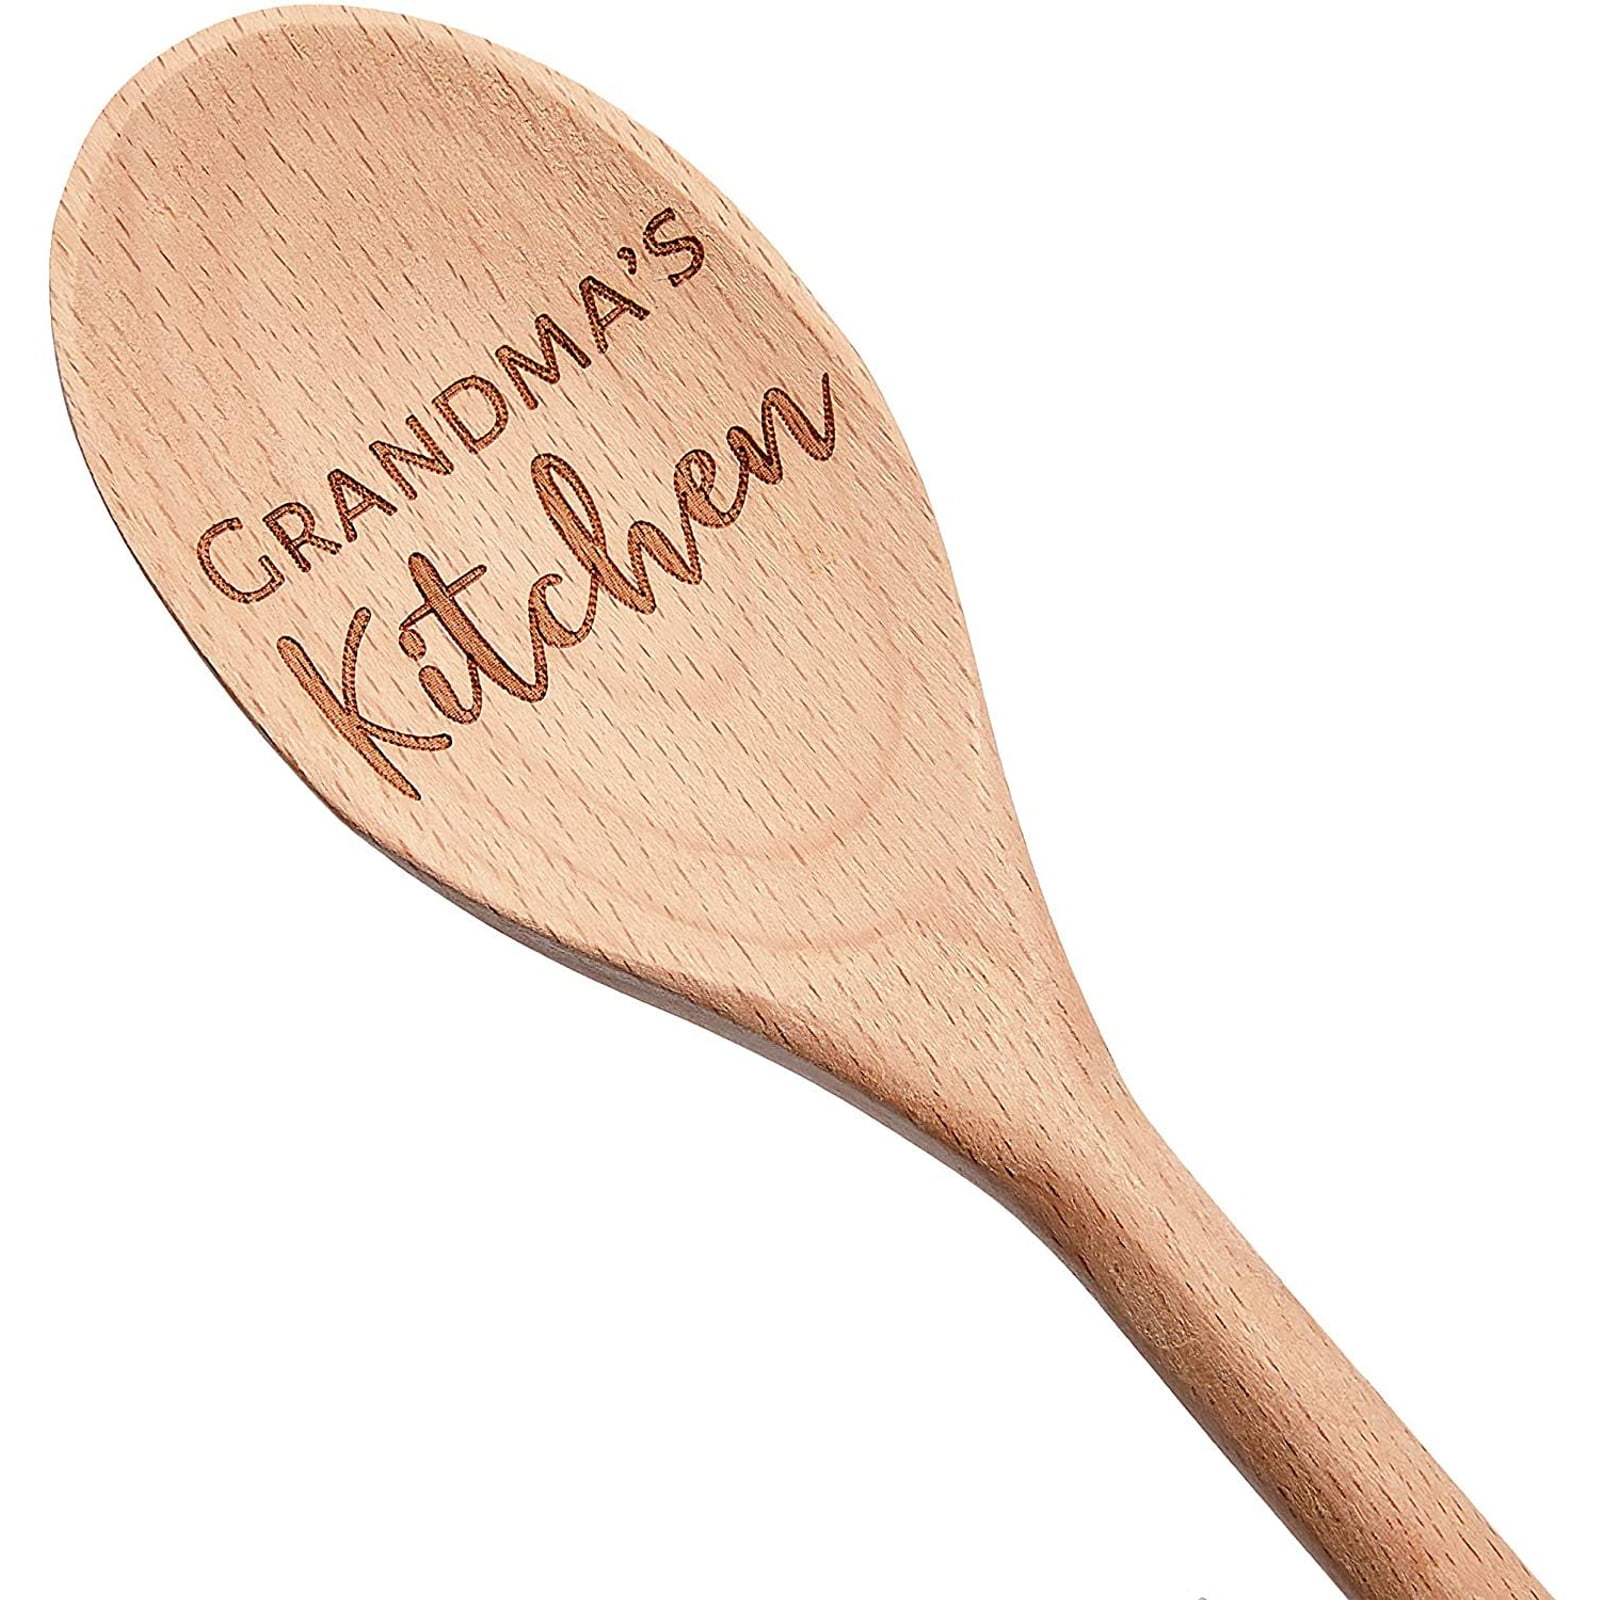 Wooden large spoon Olive Wood Big Spoon 9 Inch Mom Gift Kitchen gift